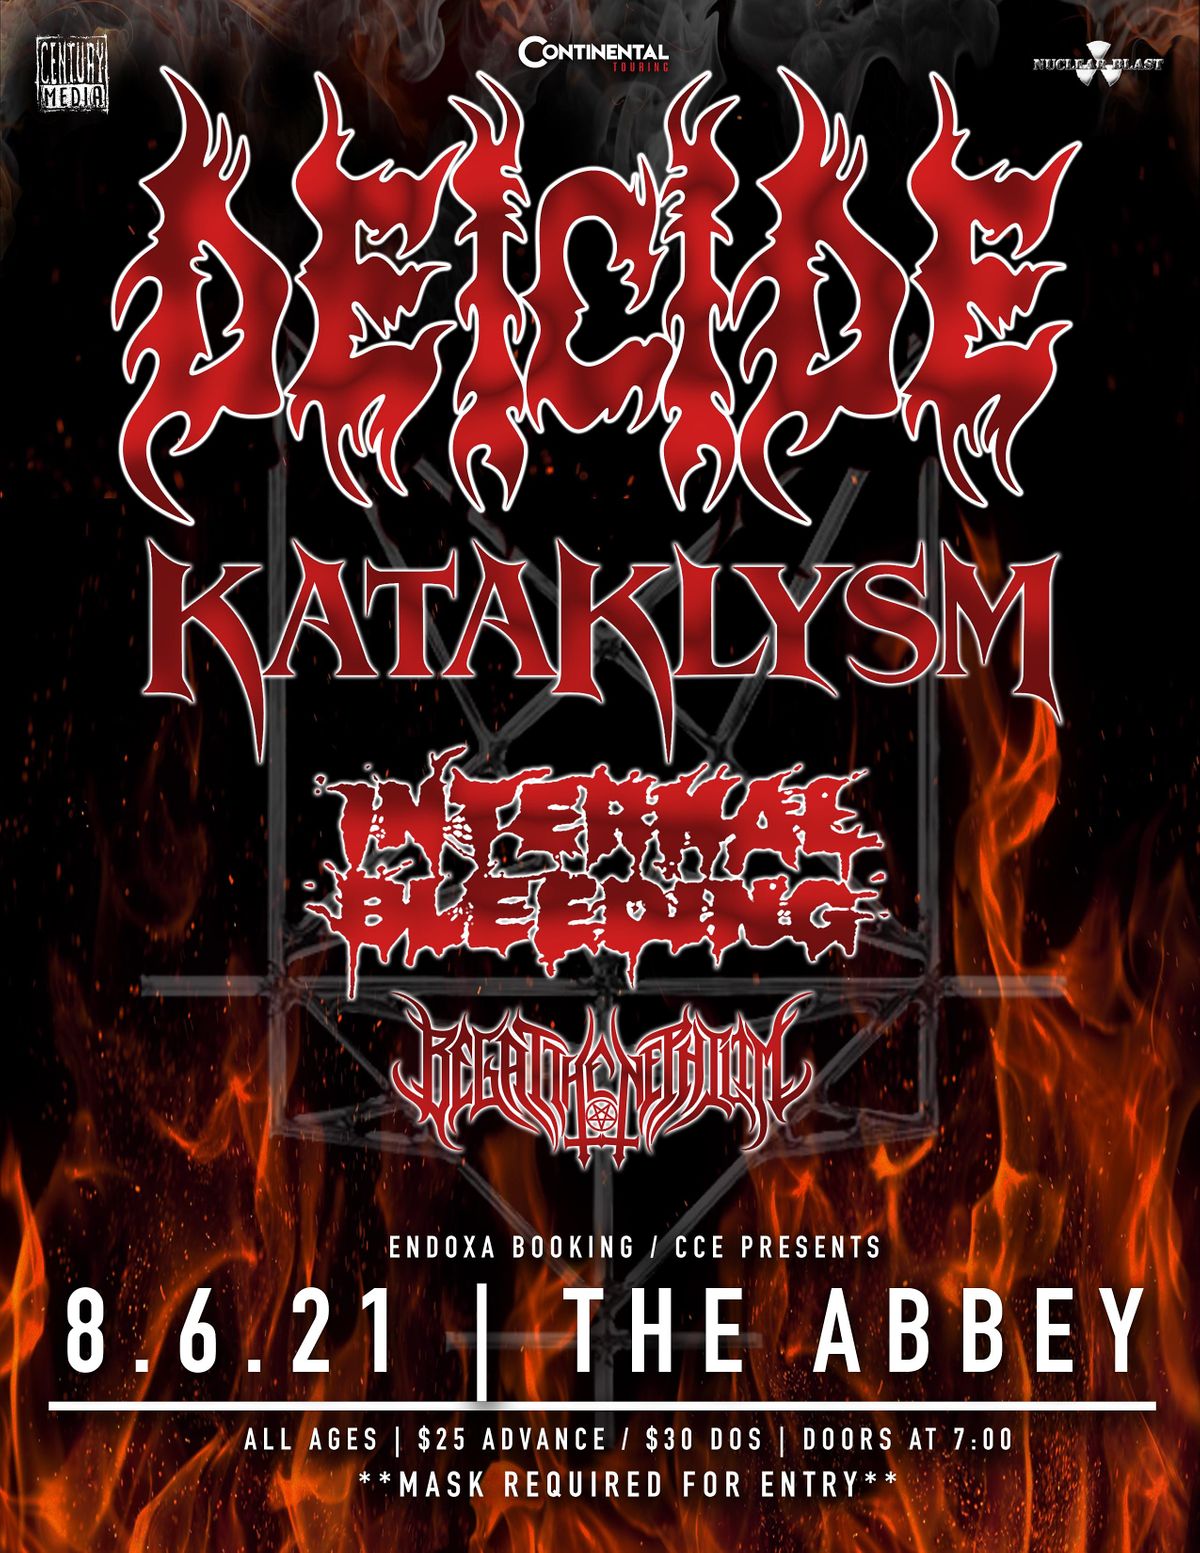 Deicide, Kataklysm, and more at The Abbey